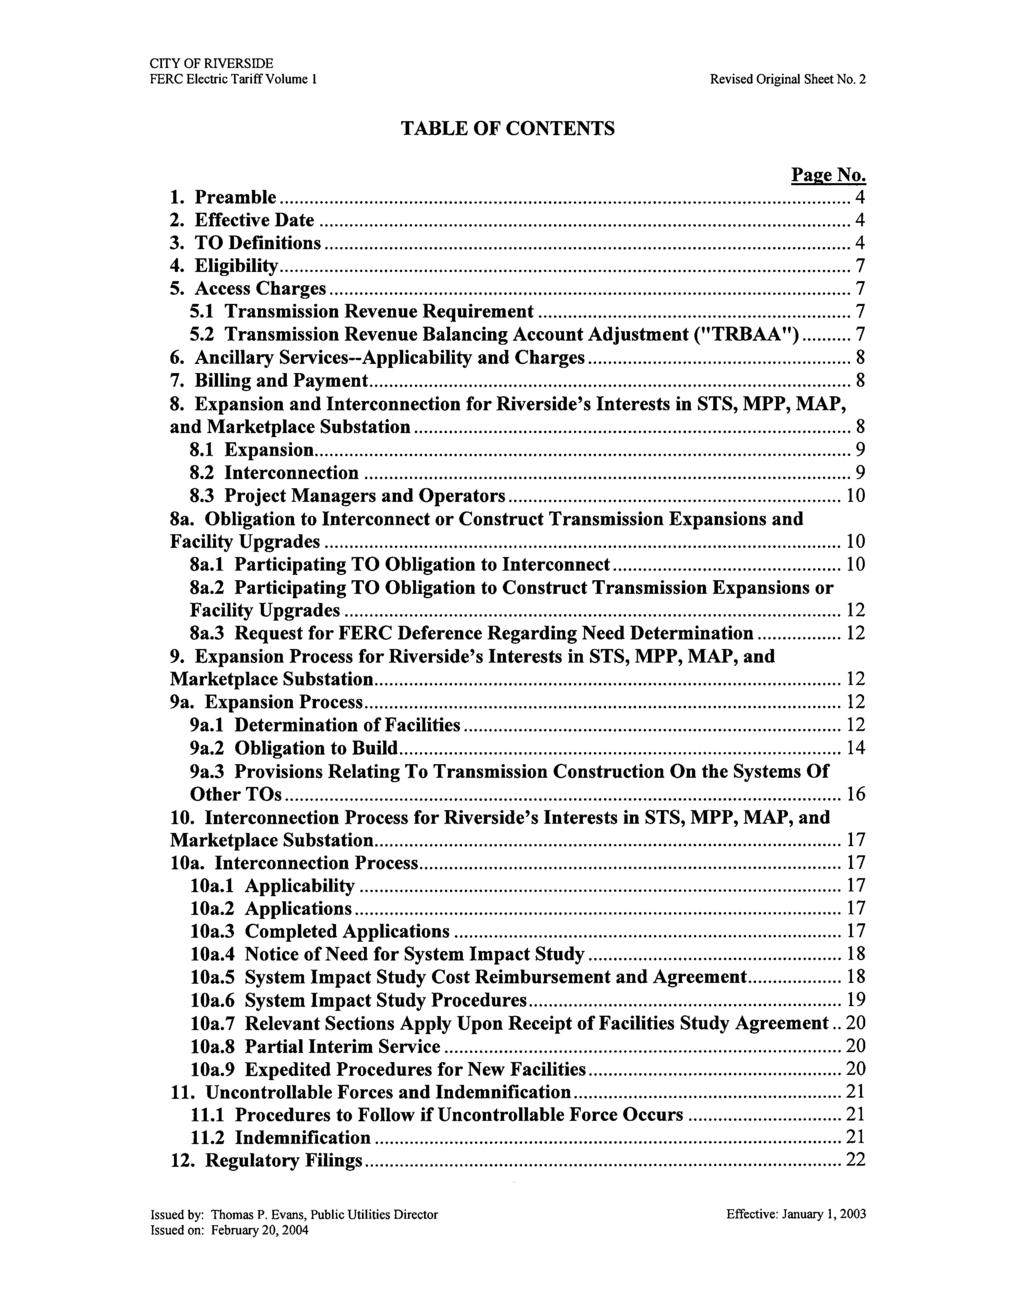 FERC Electric Tariff Volume 1 Revised Original Sheet No. 2 TABLE OF CONTENTS Page No. 1. Preamble 4 2. Effective Date 4 3. TO Definitions 4 4. Eligibility 7 5. Access Charges 7 5.